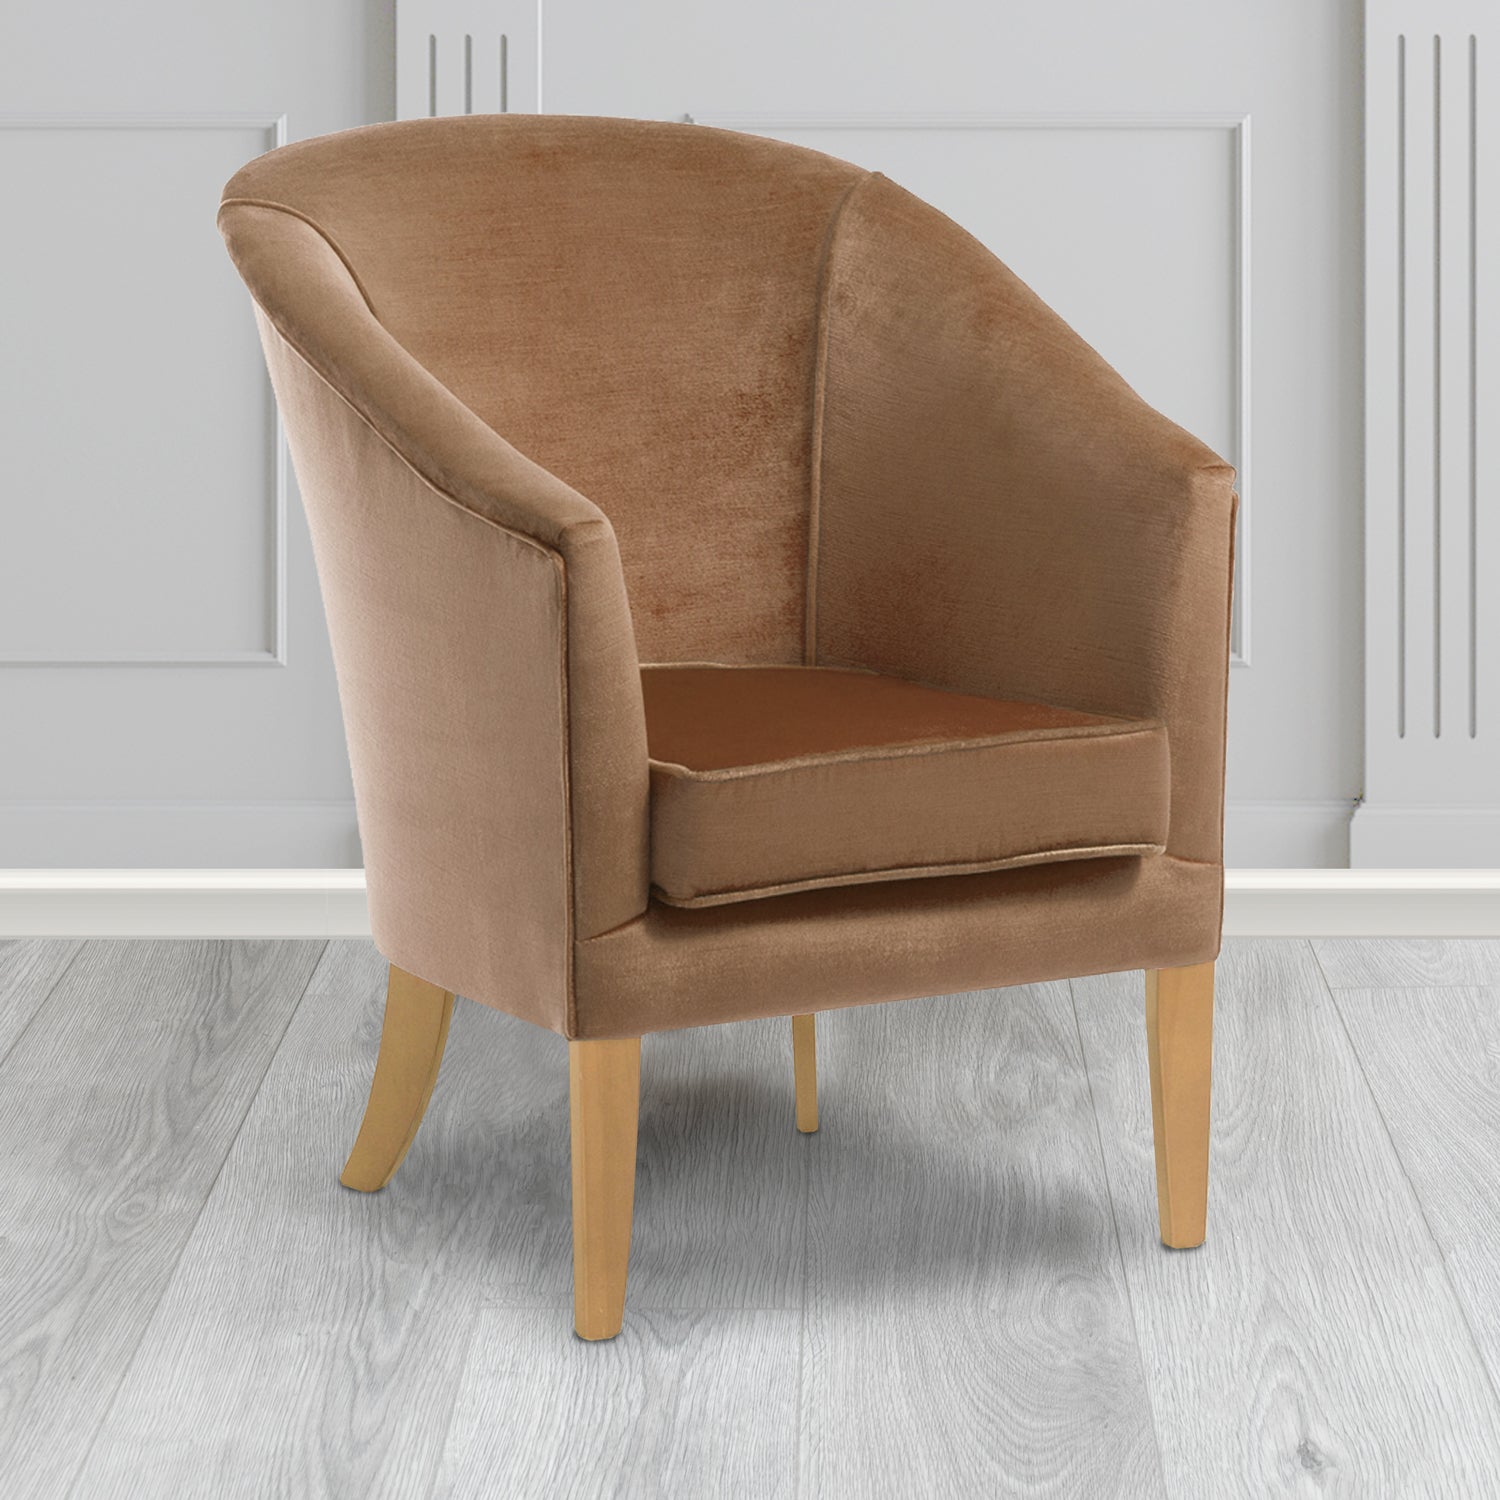 Burton Tub Chair in Noble 806 Camel Crib 5 Velvet Fabric - Water Resistant - The Tub Chair Shop